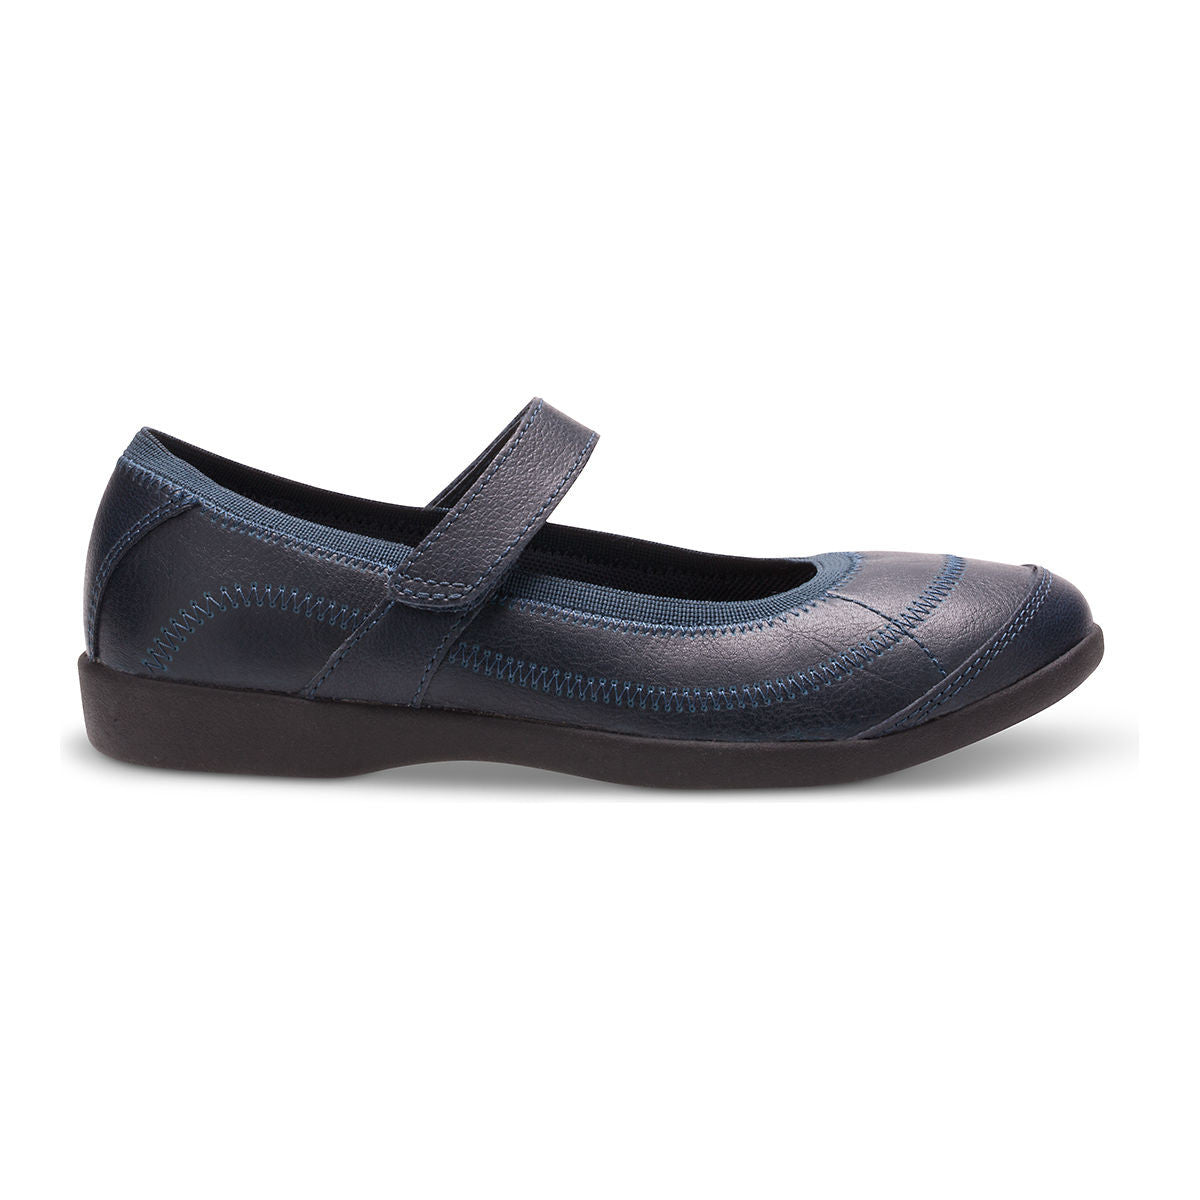 Smooth Leather Black Hush Puppies Sandals For Men F86465250000ff, Size: 7,  8, 9, 10 at Rs 2699/pair in Ahmedabad